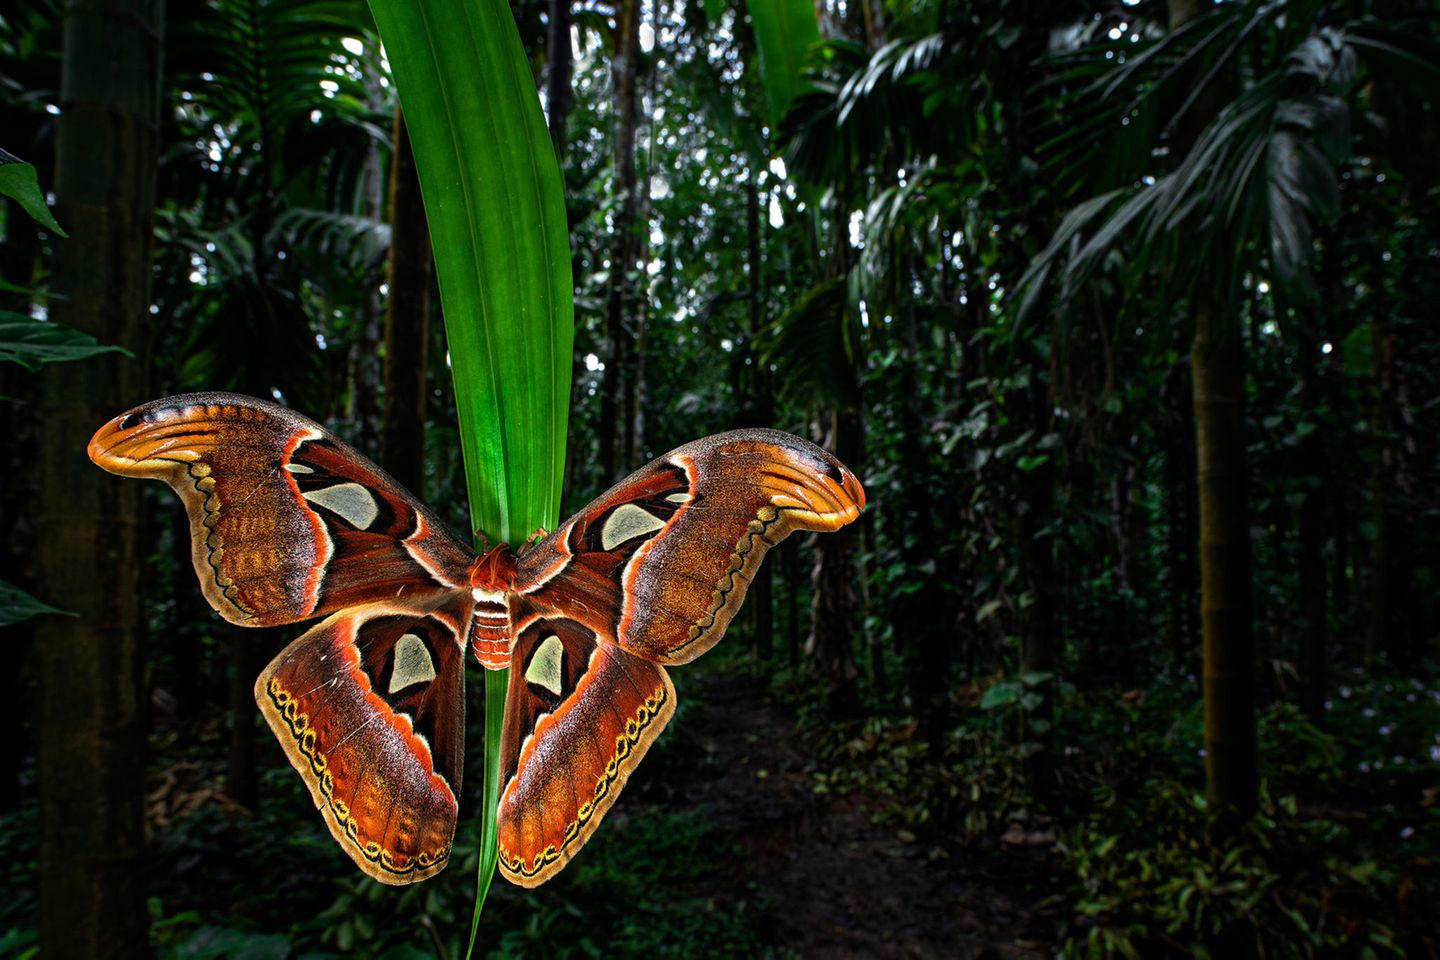 Butterflies-2nd-Uday-Hegde-Atlas-Moth-CUPOTY  Name: Uday Hegde Picture title: Atlas Moth Category: Butterflies & Dragonflies (2nd Place) Nationality: Indian Occupation: Software Architect      Uday: ‘This beautiful Atlas moth (Attacus atlas) was found during my daily walk in our areca nut plantation in Sirsi, India. As our plantation is surrounded by evergreen forest a lot of frogs, snakes, insects and butterflies take shelter there. These huge moths often have a wingspan that extends beyond nine inches. I wanted to show the moth in its habitat, so I decided to shoot this picture with a wide-angle macro lens. I set-up the camera, tripod, flash and trigger away from the moth so that it would not get disturbed. Once I felt happy with the set-up I placed my camera near the moth, composed the frame and took 5-6 shots.’      Technical information: Canon EOS 5D Mark IV Laowa 15mm f/4 1:1 Macro 1/160, f/11, ISO200 Accessories: Used Godox trigger to fire the off camera Godox flash.  Post processing: Basic adjustments in Photoshop, small crop      Instagram: hegdeuday  Facebook: 2udayhegde